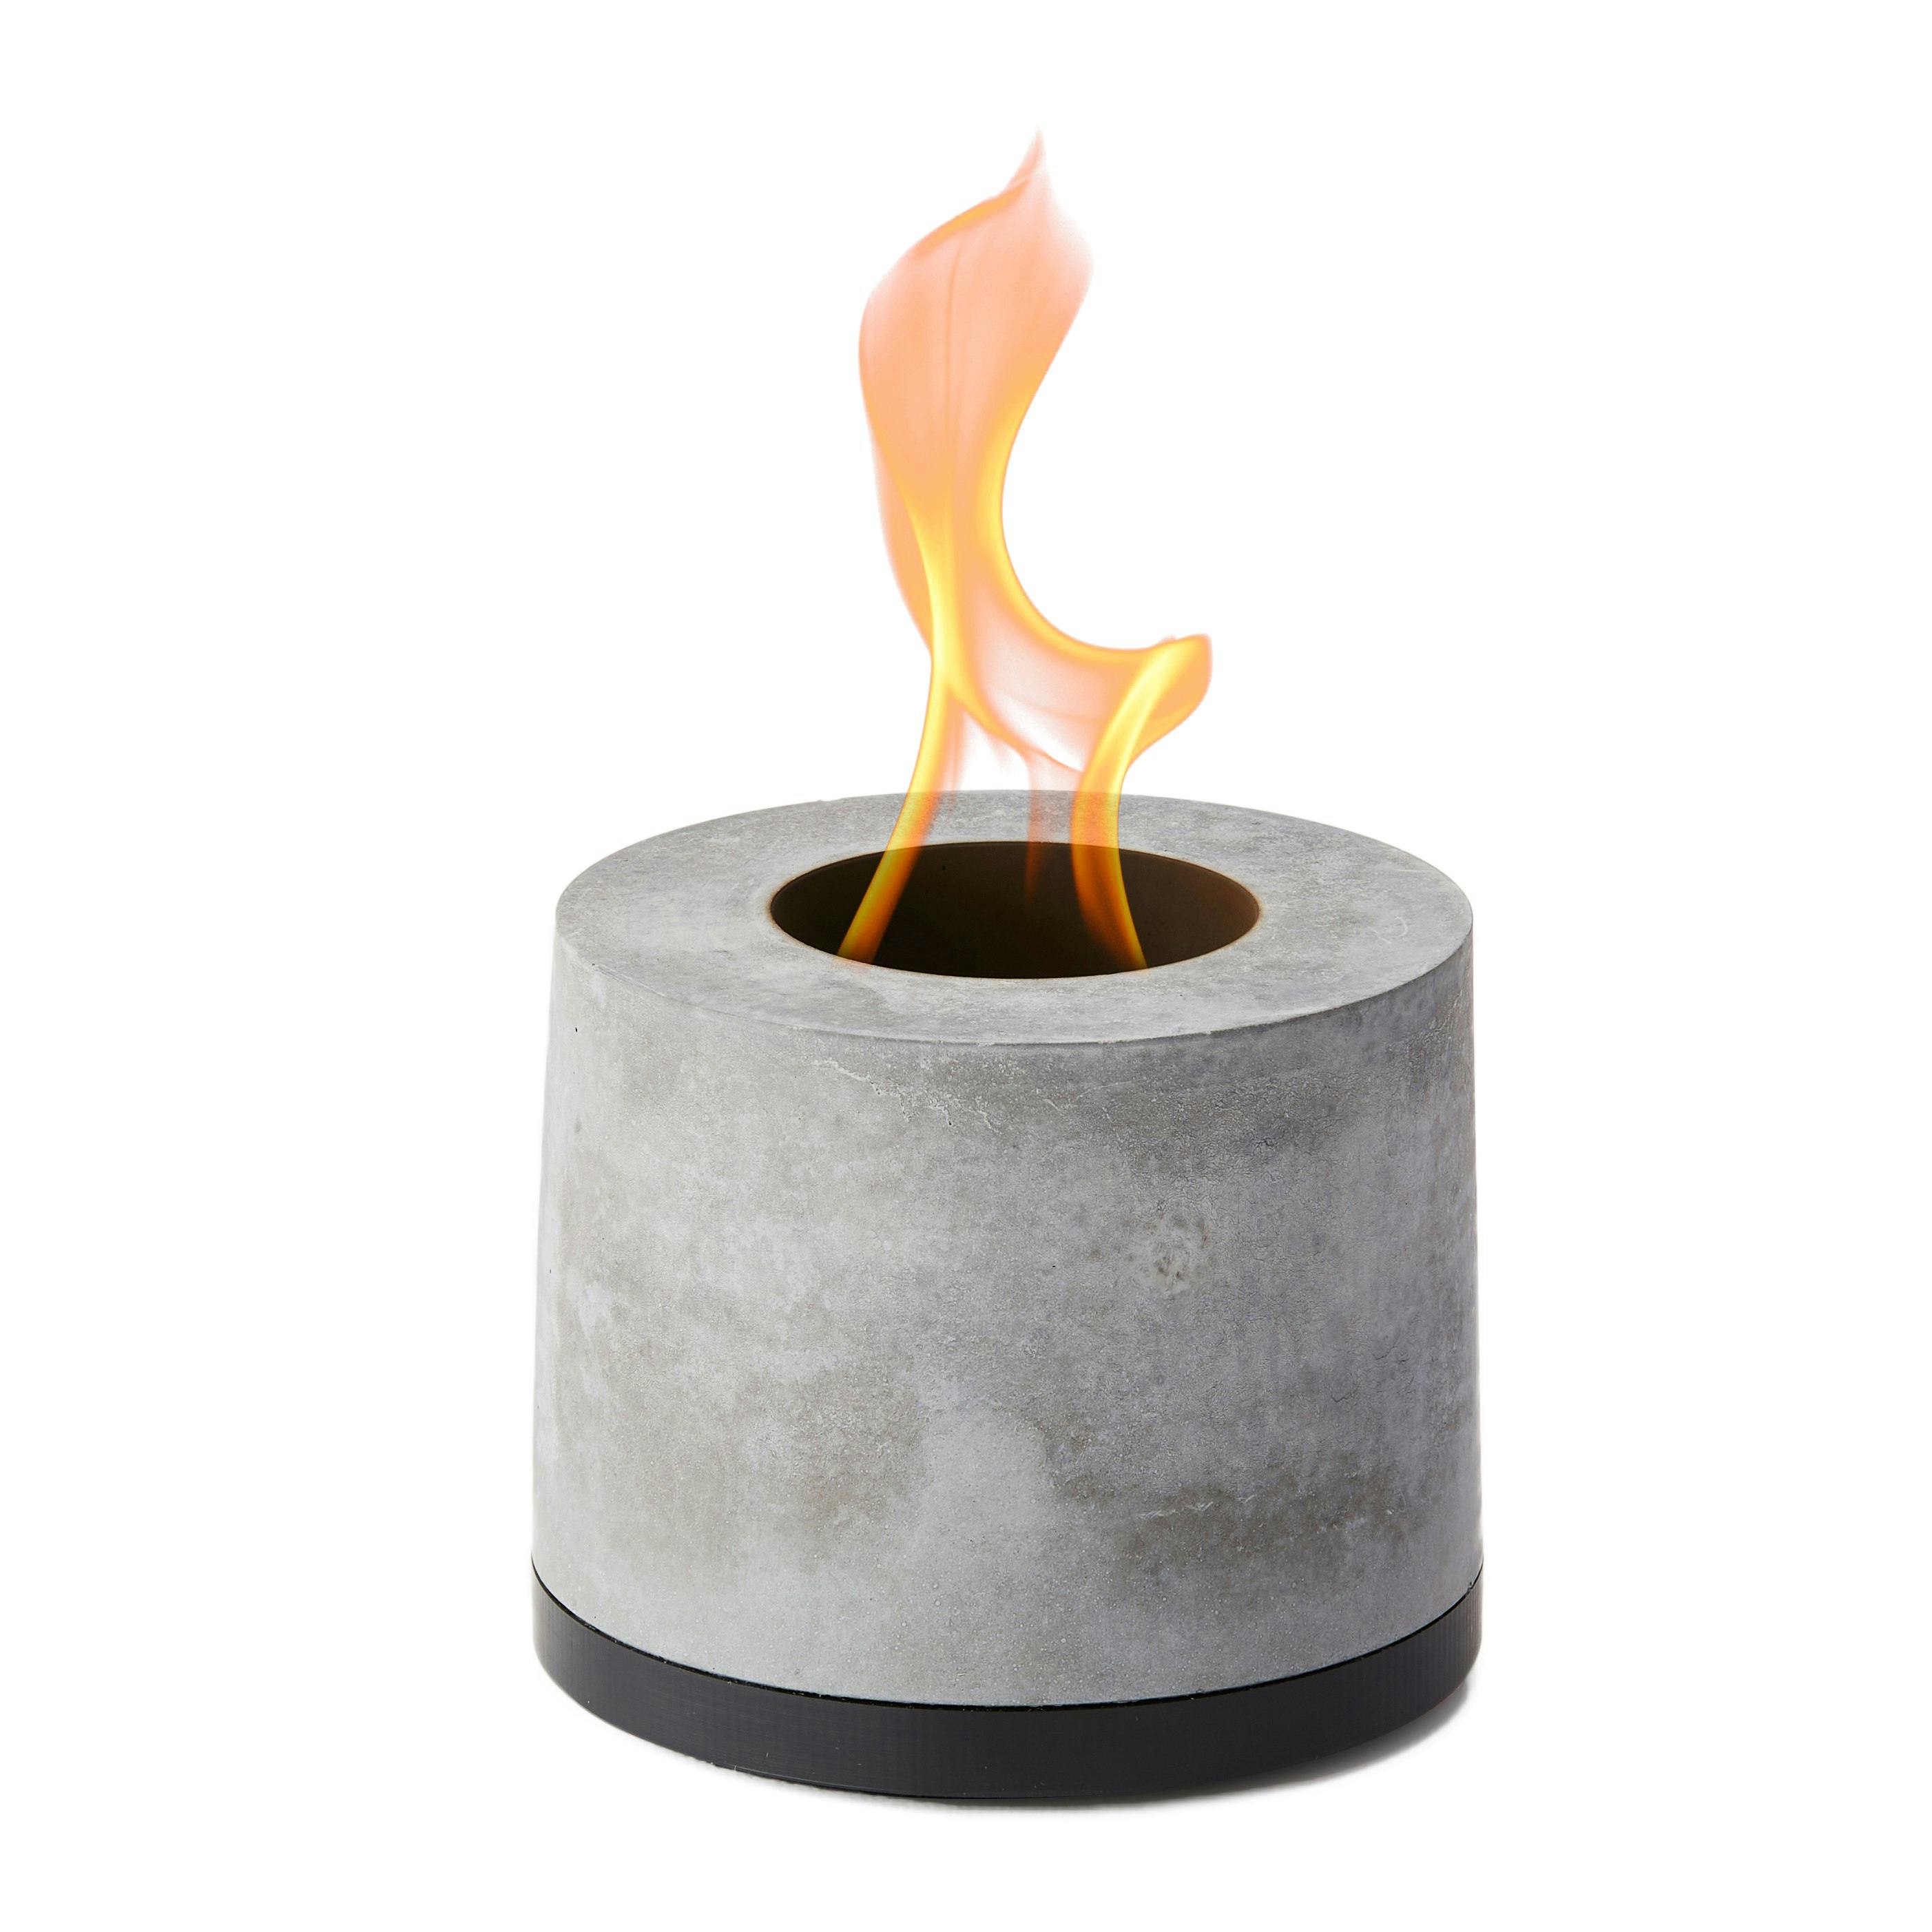 Personal Concrete Fireplace - Exclusive